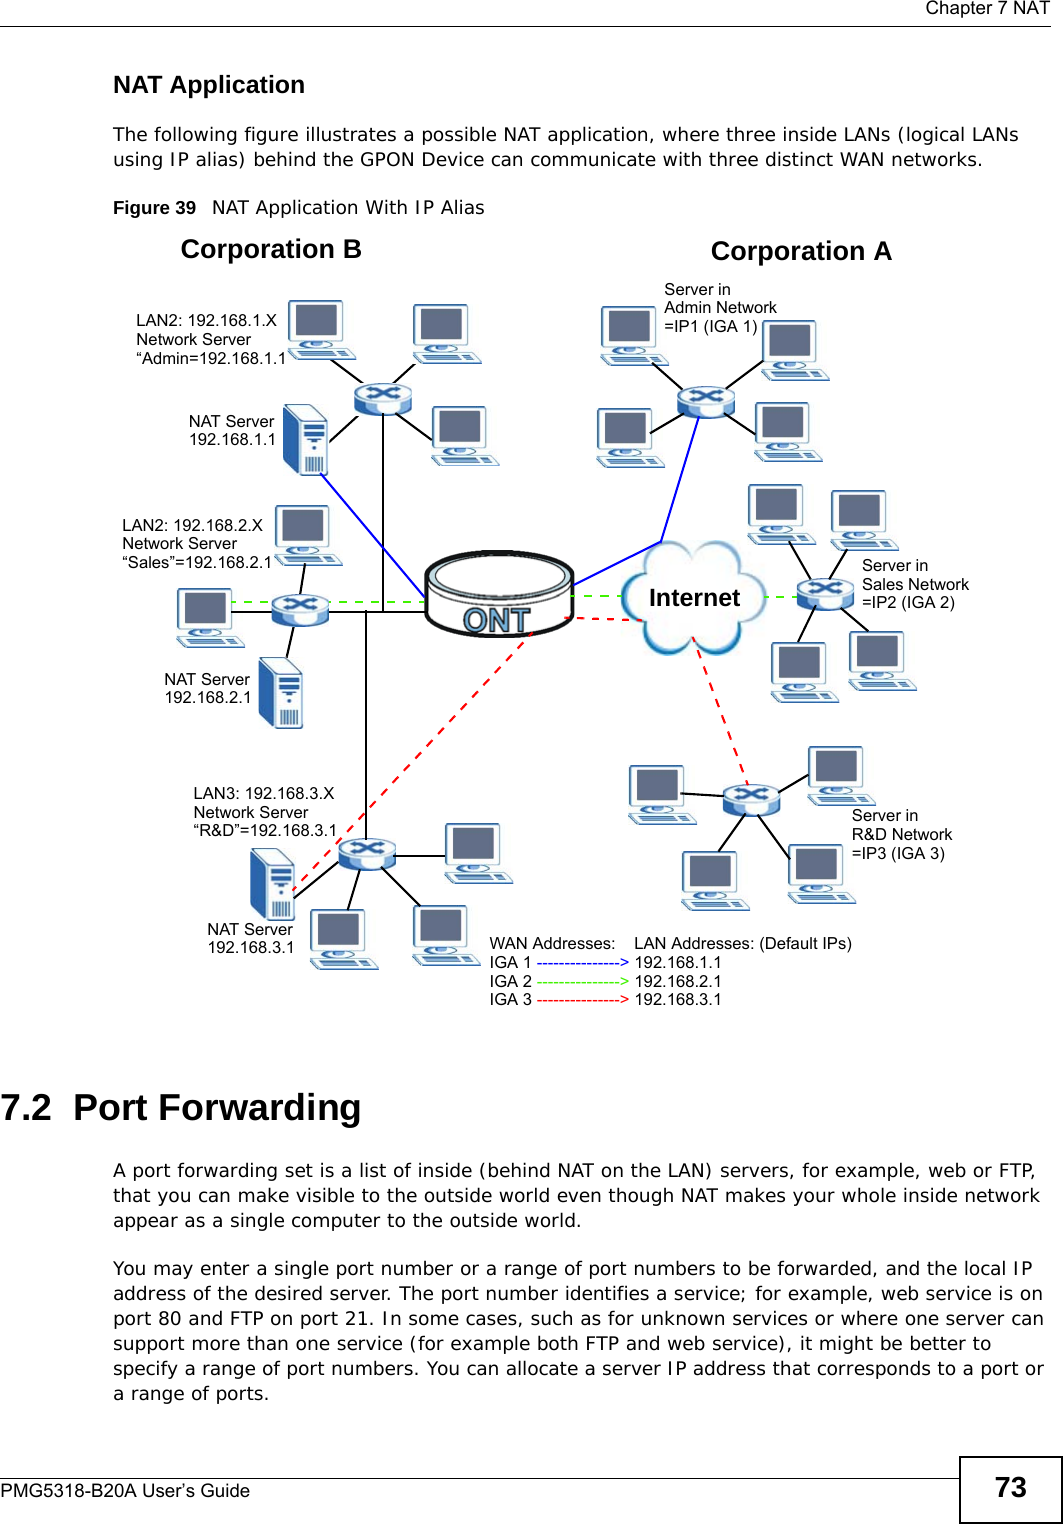  Chapter 7 NATPMG5318-B20A User’s Guide 73NAT ApplicationThe following figure illustrates a possible NAT application, where three inside LANs (logical LANs using IP alias) behind the GPON Device can communicate with three distinct WAN networks.Figure 39   NAT Application With IP Alias7.2  Port Forwarding  A port forwarding set is a list of inside (behind NAT on the LAN) servers, for example, web or FTP, that you can make visible to the outside world even though NAT makes your whole inside network appear as a single computer to the outside world. You may enter a single port number or a range of port numbers to be forwarded, and the local IP address of the desired server. The port number identifies a service; for example, web service is on port 80 and FTP on port 21. In some cases, such as for unknown services or where one server can support more than one service (for example both FTP and web service), it might be better to specify a range of port numbers. You can allocate a server IP address that corresponds to a port or a range of ports.InternetCorporation BNAT Server192.168.3.1LAN3: 192.168.3.XNetwork Server“R&amp;D”=192.168.3.1WAN Addresses:    LAN Addresses: (Default IPs)IGA 1 ---------------&gt; 192.168.1.1IGA 2 ---------------&gt; 192.168.2.1IGA 3 ---------------&gt; 192.168.3.1NAT Server192.168.2.1LAN2: 192.168.2.XNetwork Server“Sales”=192.168.2.1Server inR&amp;D Network=IP3 (IGA 3)NAT Server192.168.1.1LAN2: 192.168.1.XNetwork Server“Admin=192.168.1.1Corporation AServer inSales Network=IP2 (IGA 2)Server inAdmin Network=IP1 (IGA 1)